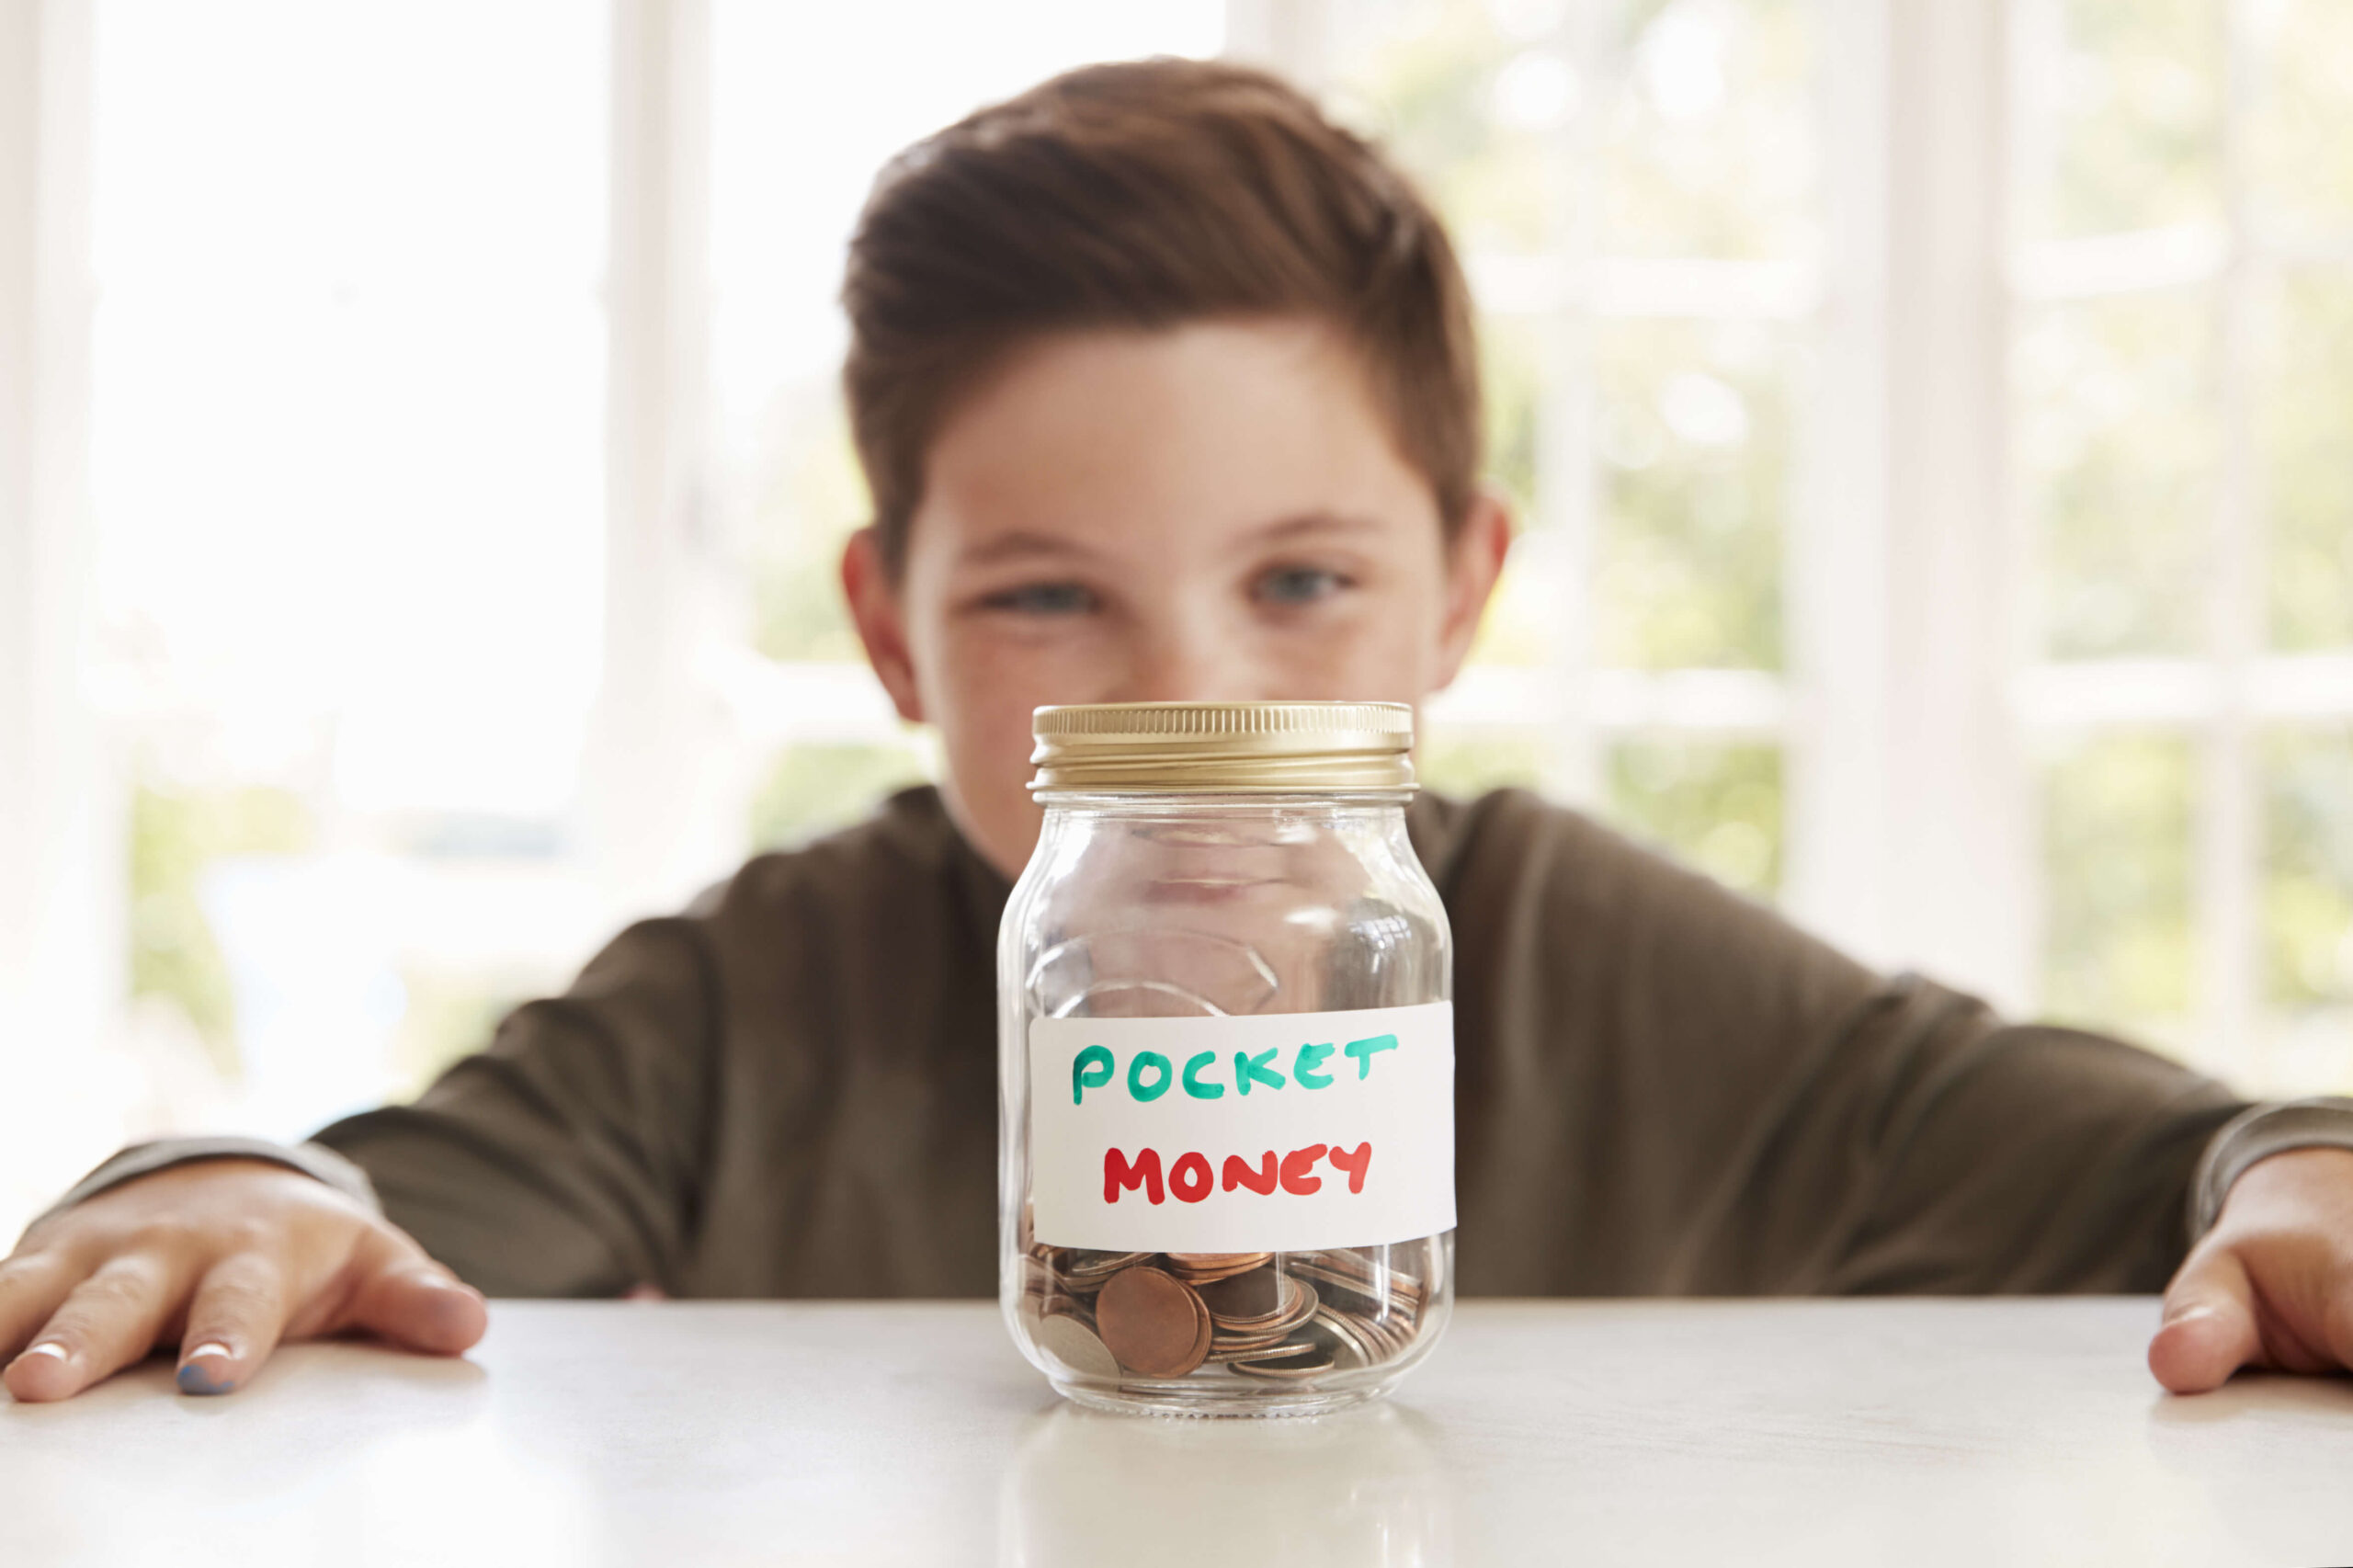 Pocket Money for Kids: Do You Need to Give It or Not